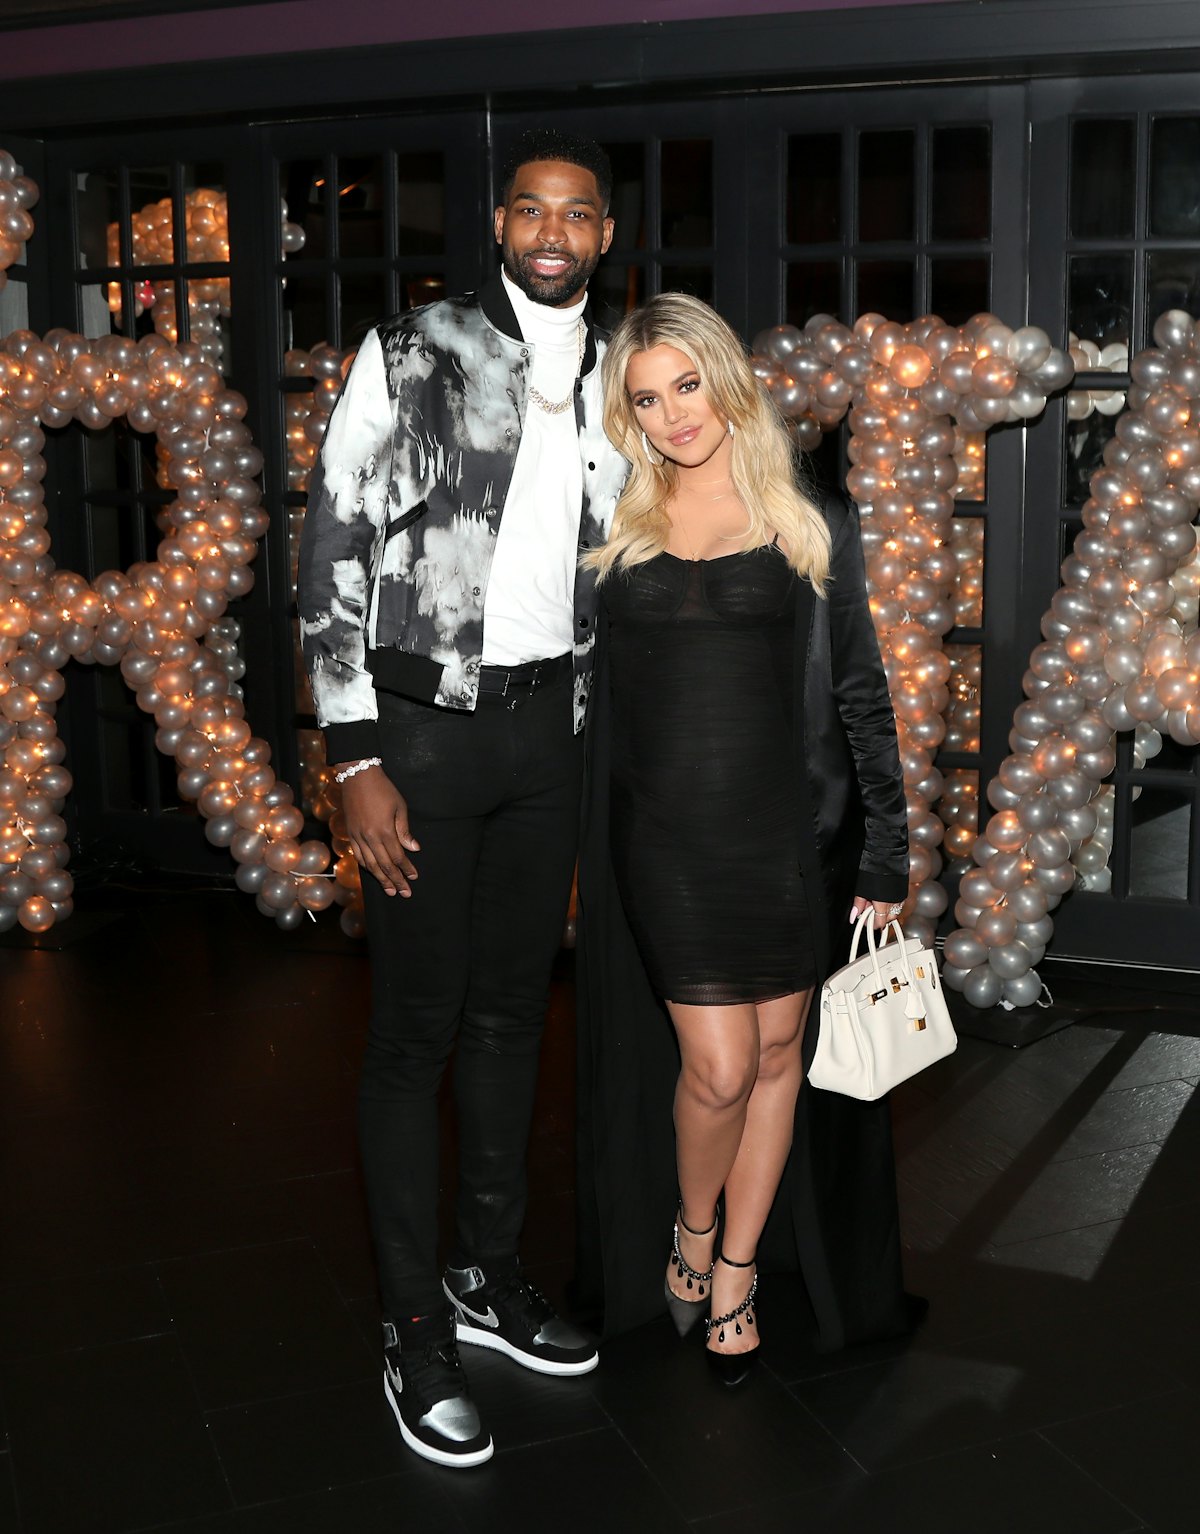 LOS ANGELES, CA - MARCH 10: Tristan Thompson and Khloe Kardashian pose for a photo as Remy Martin c ...